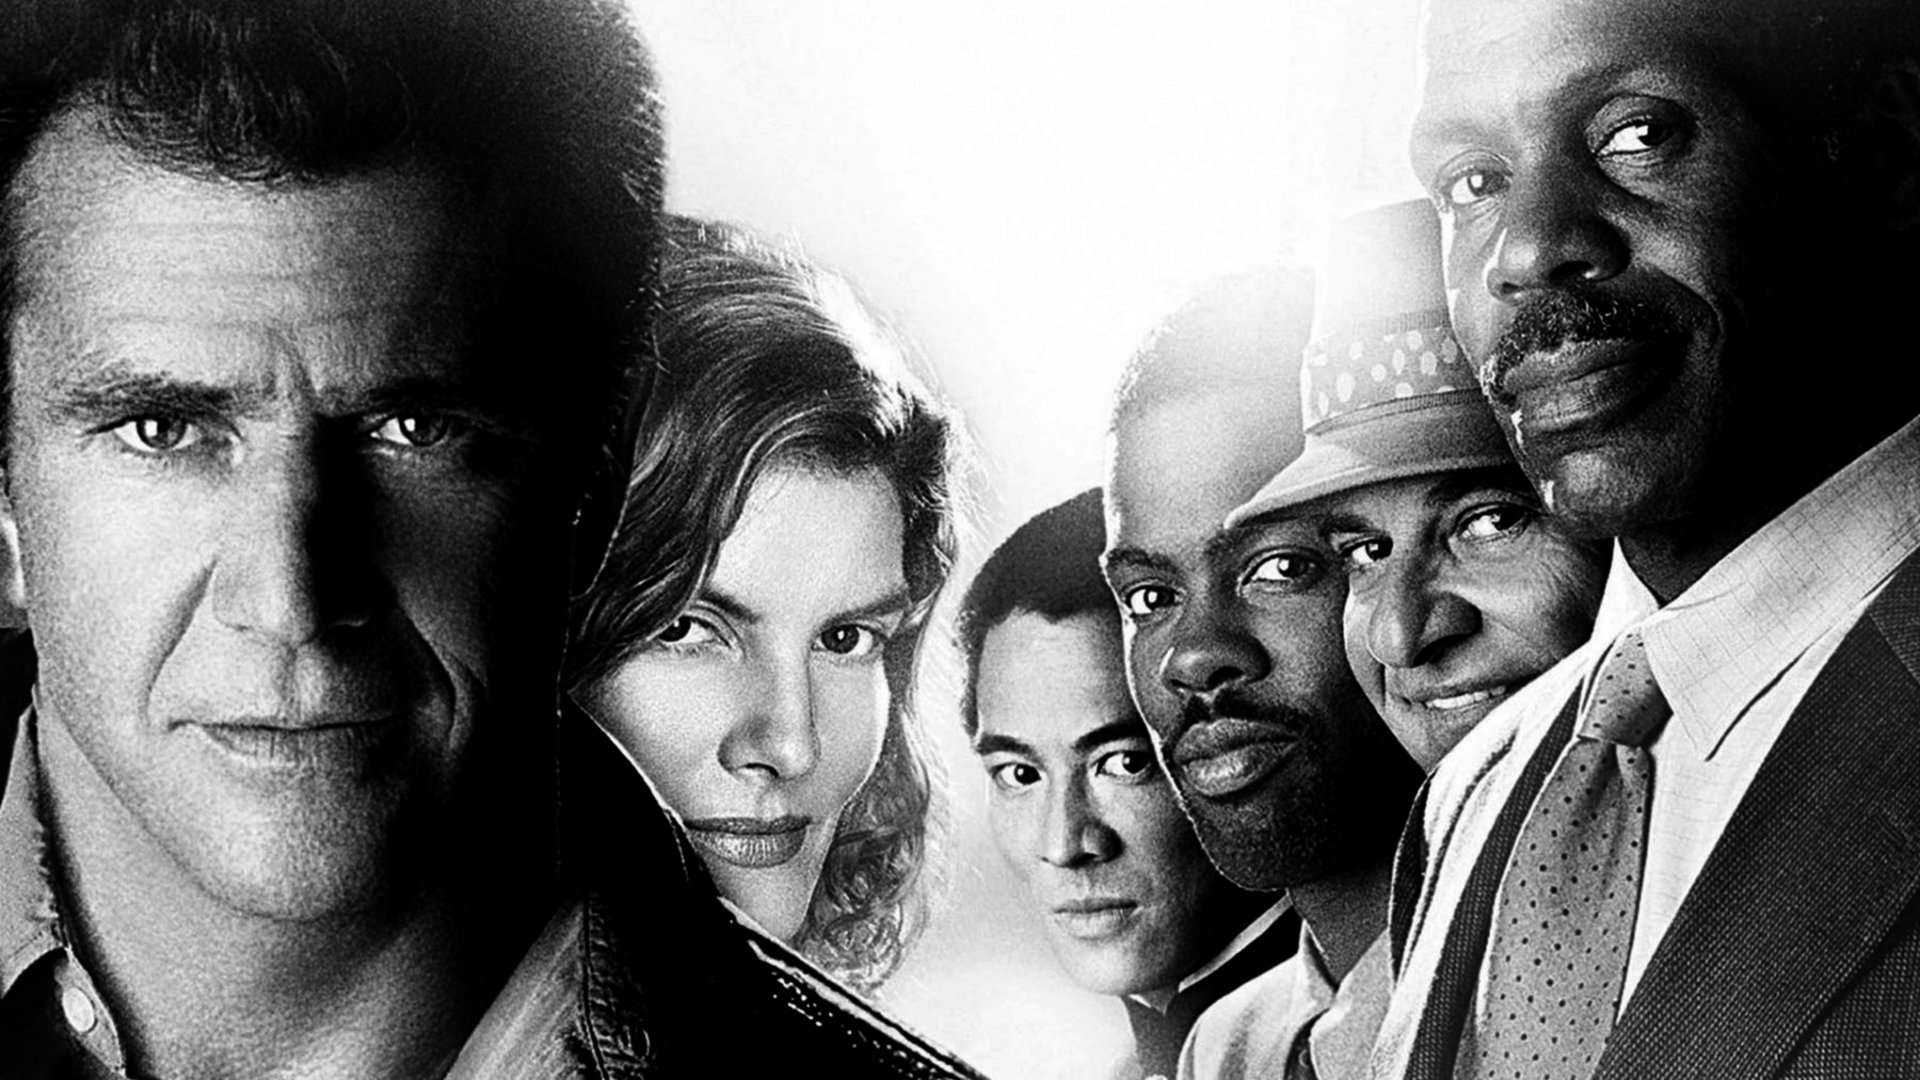 lethal weapon wallpaper,people,fun,black and white,photography,movie